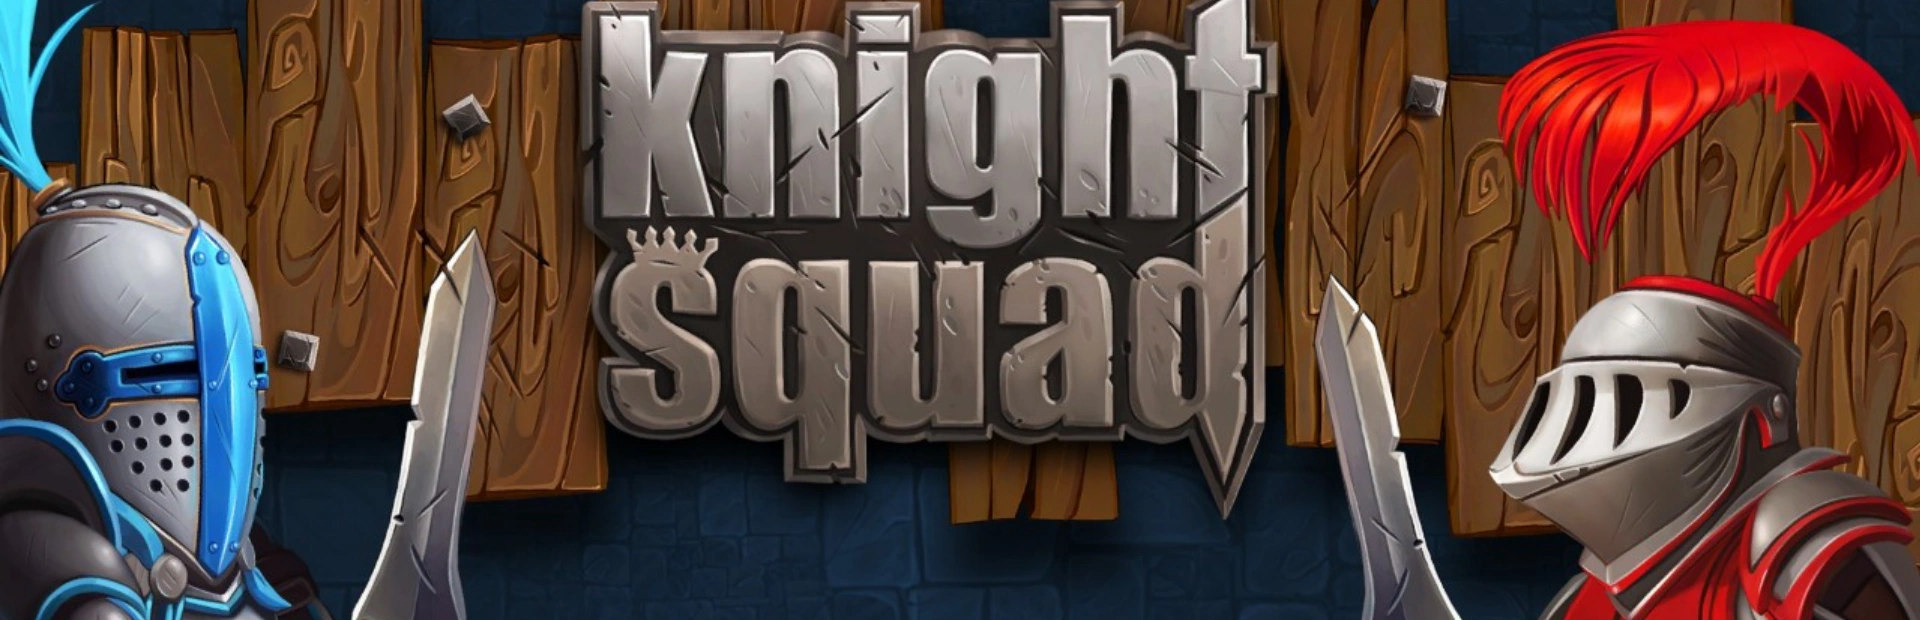 Knight.Squad .banner2